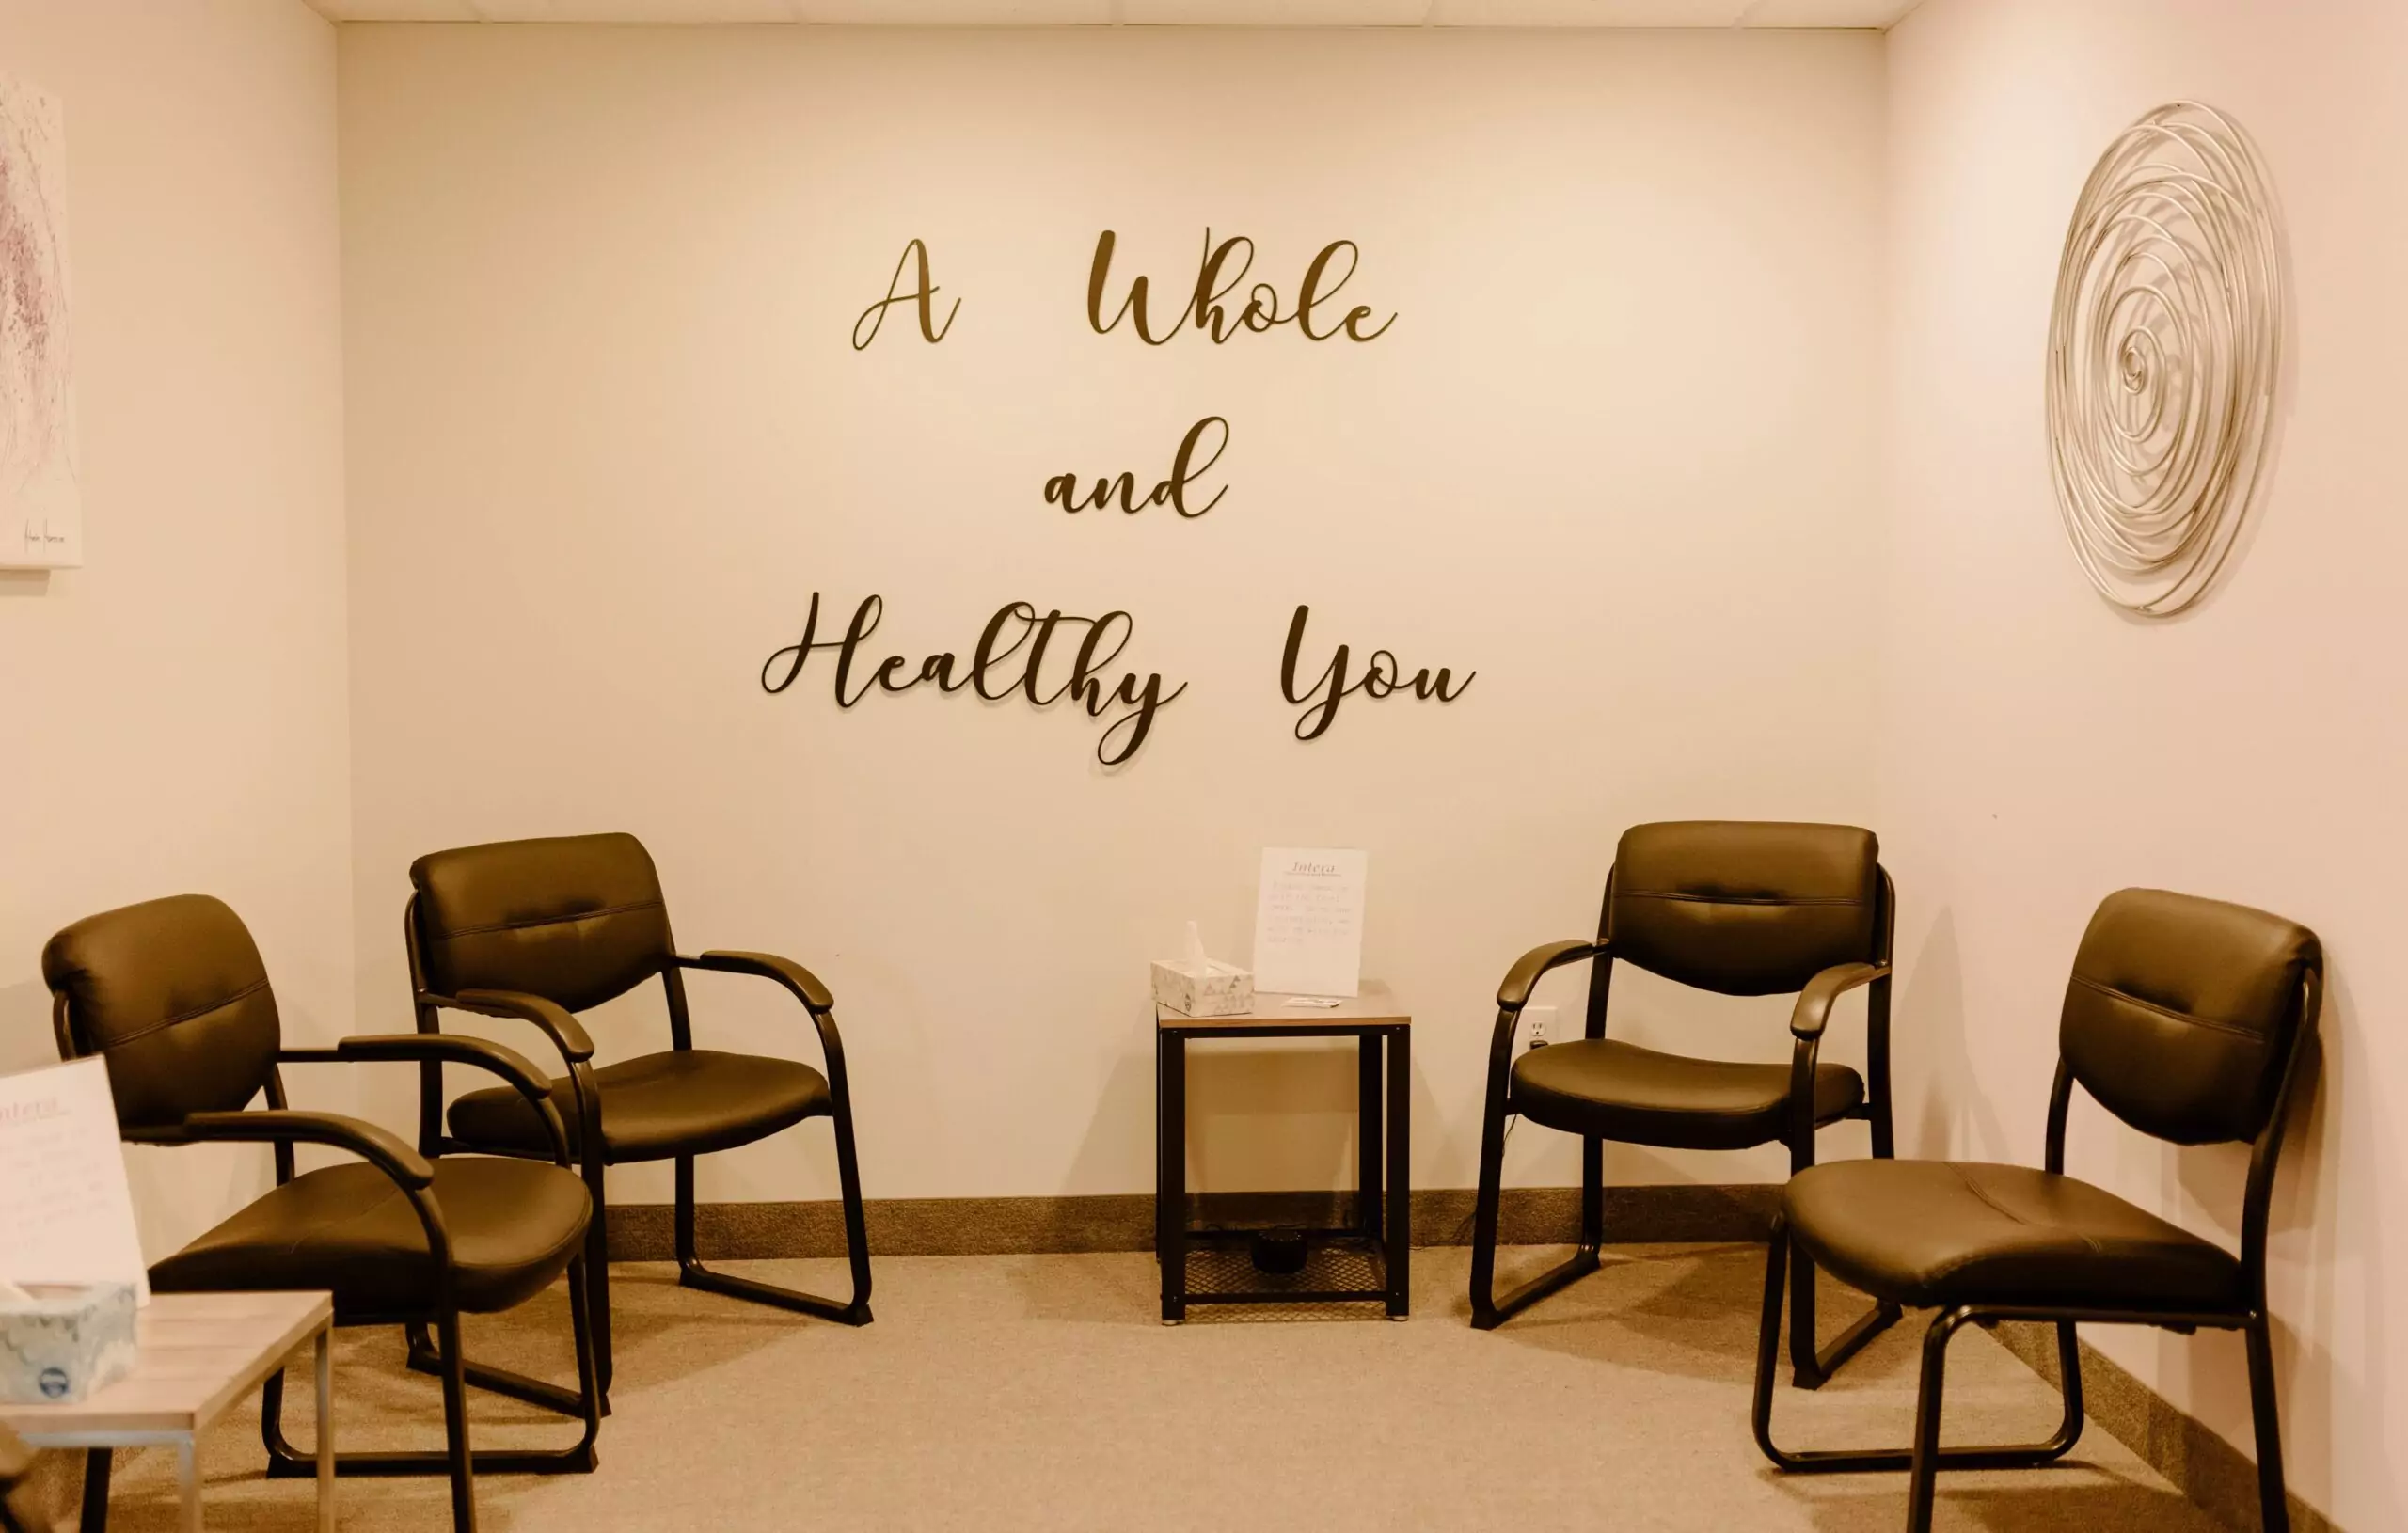 Whole-and-Healthy-You logo on the wall in the Intera office waiting room.